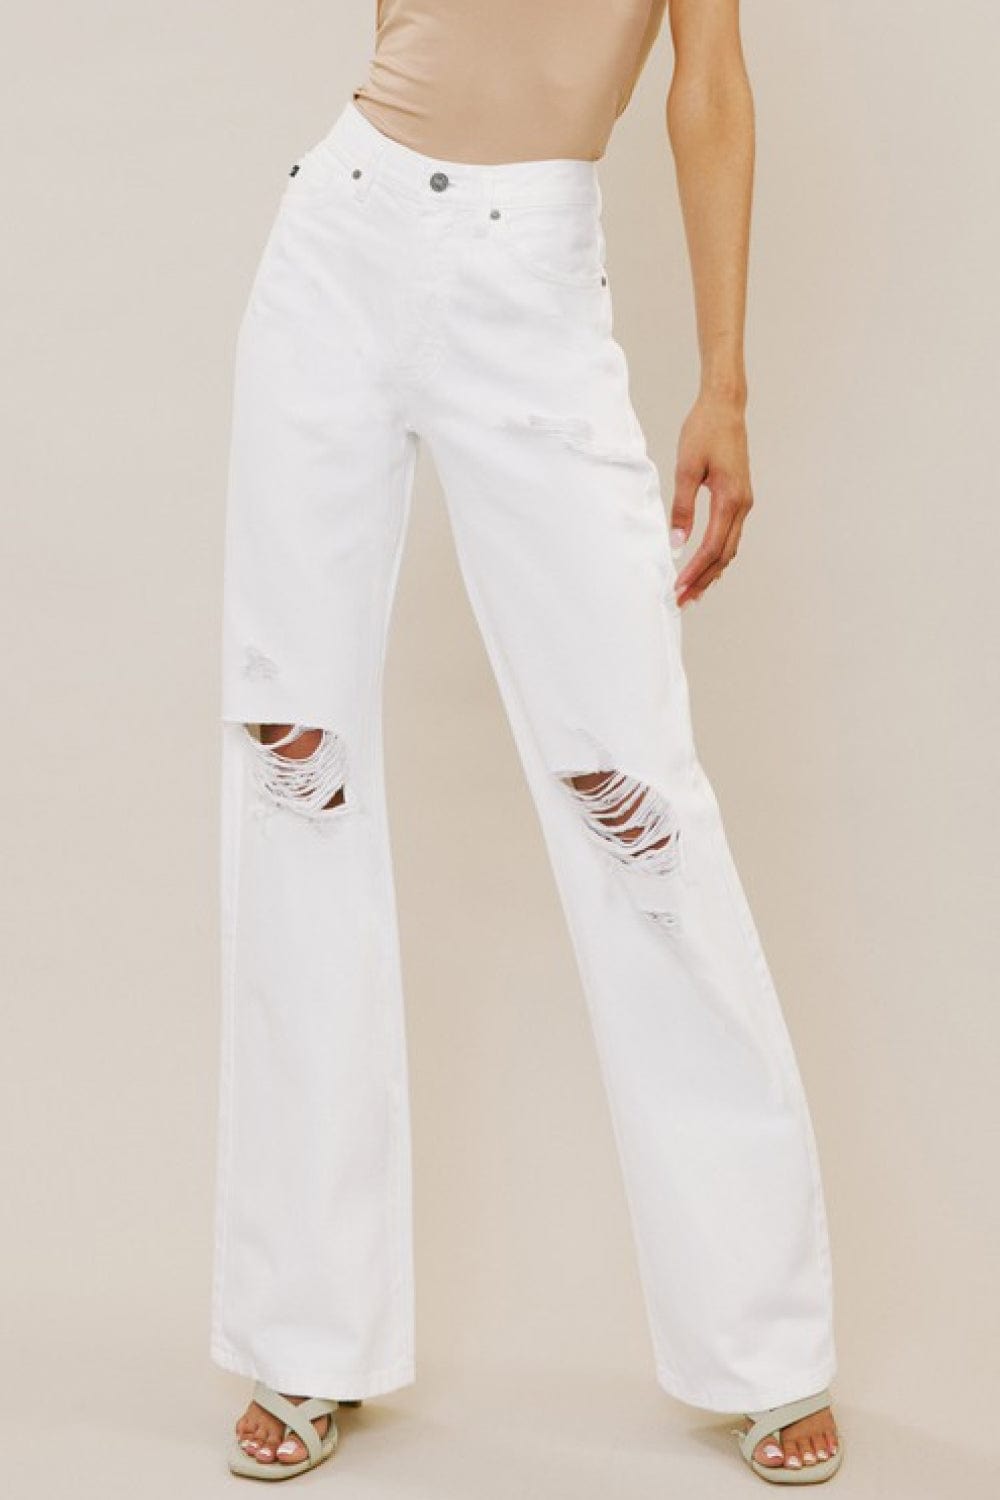 Kancan High-Rise Distressed Flare Jeans in White (Button-Fly) 1.00E+14 White / 24-Jan